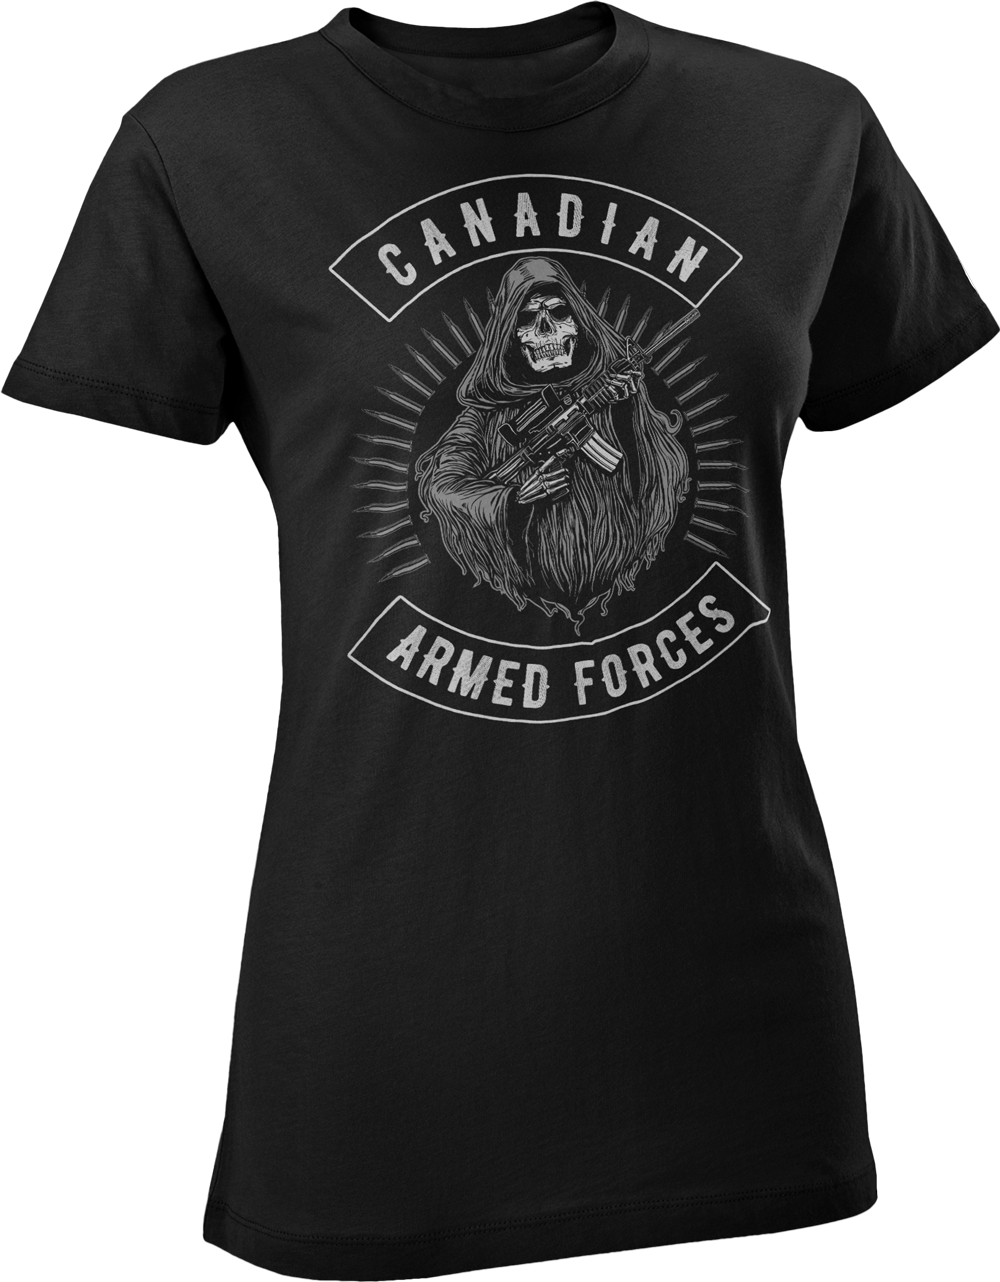 Armed Forces Reaper Women's T-Shirt